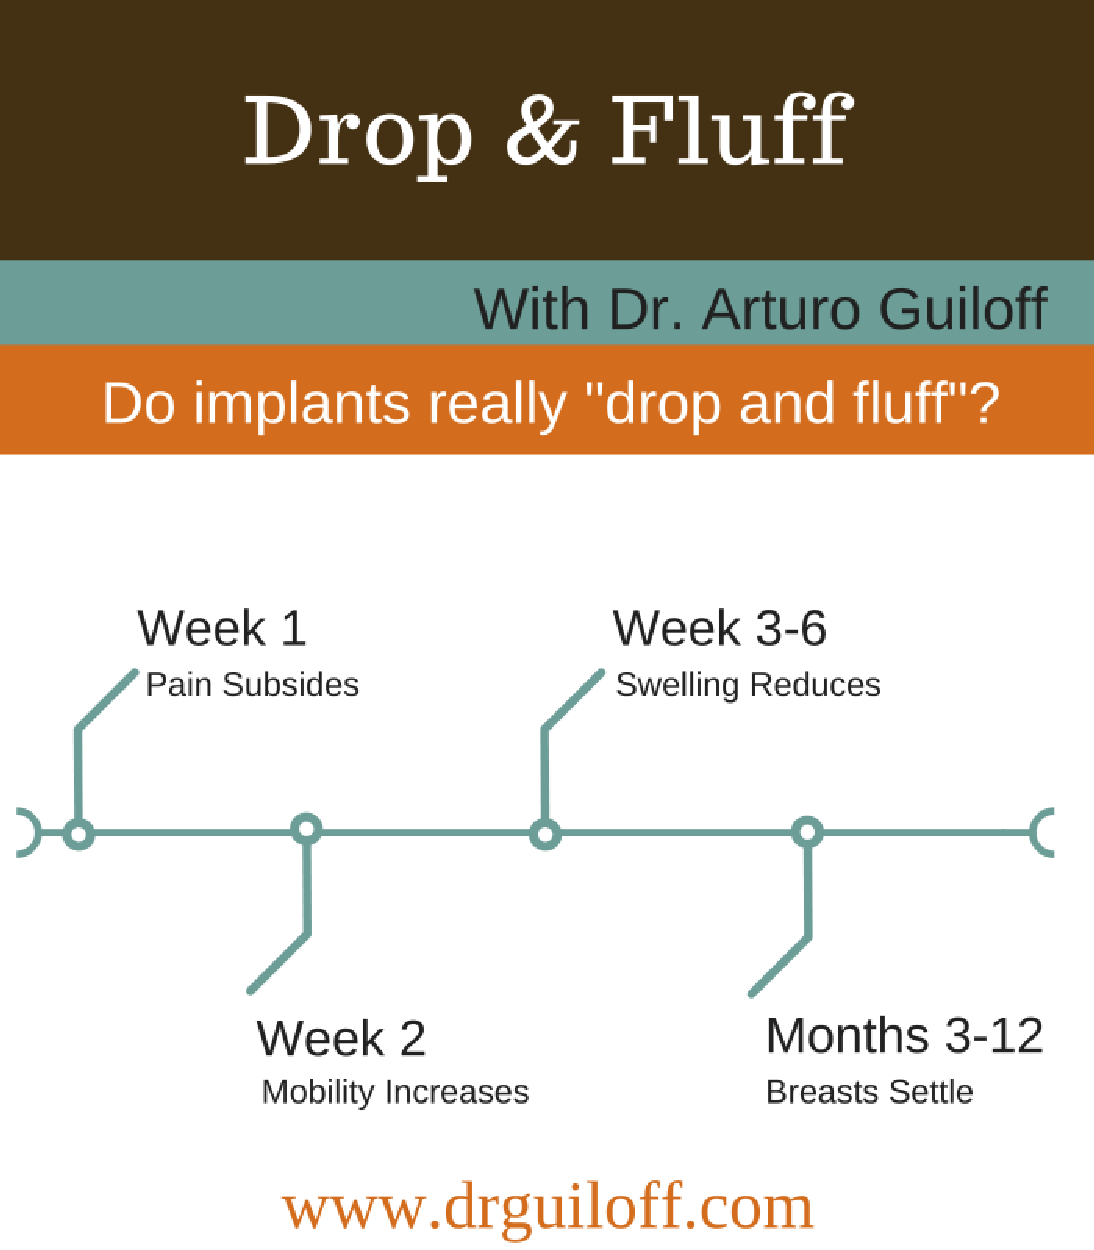 Drop and Fluff after Breast Implants